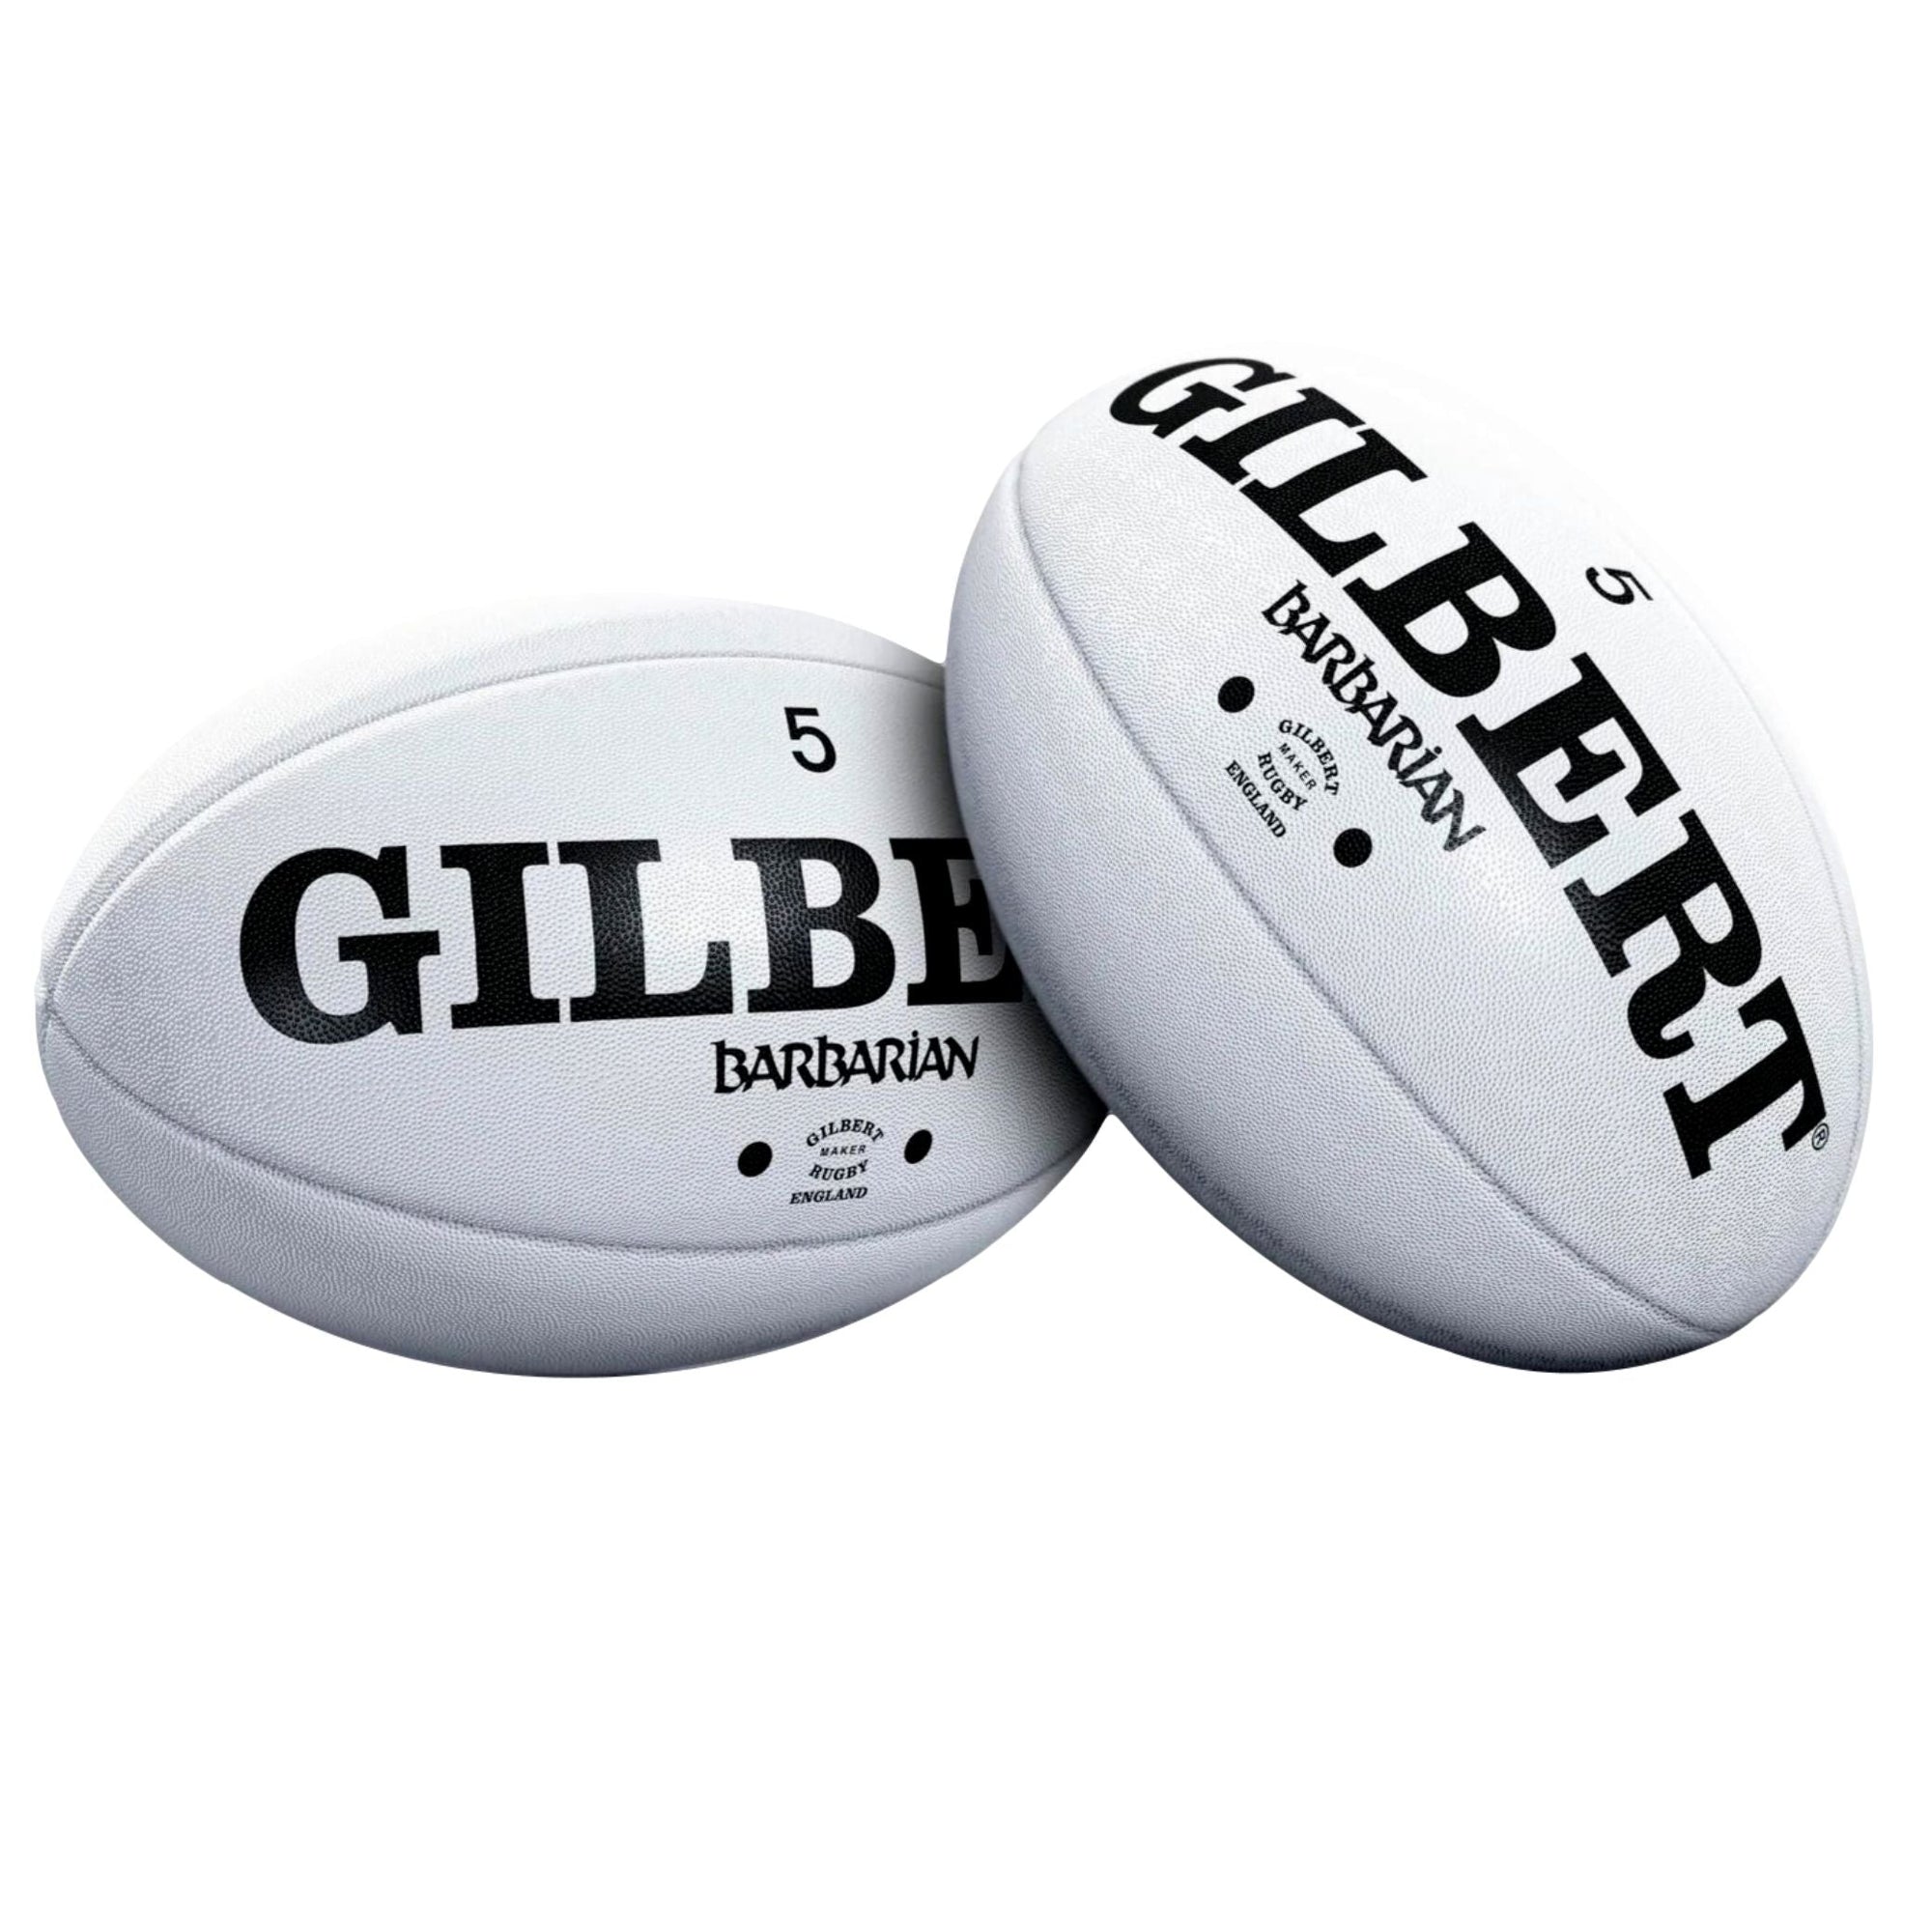 Rugby Imports Gilbert Original Barbarian Match Rugby Ball